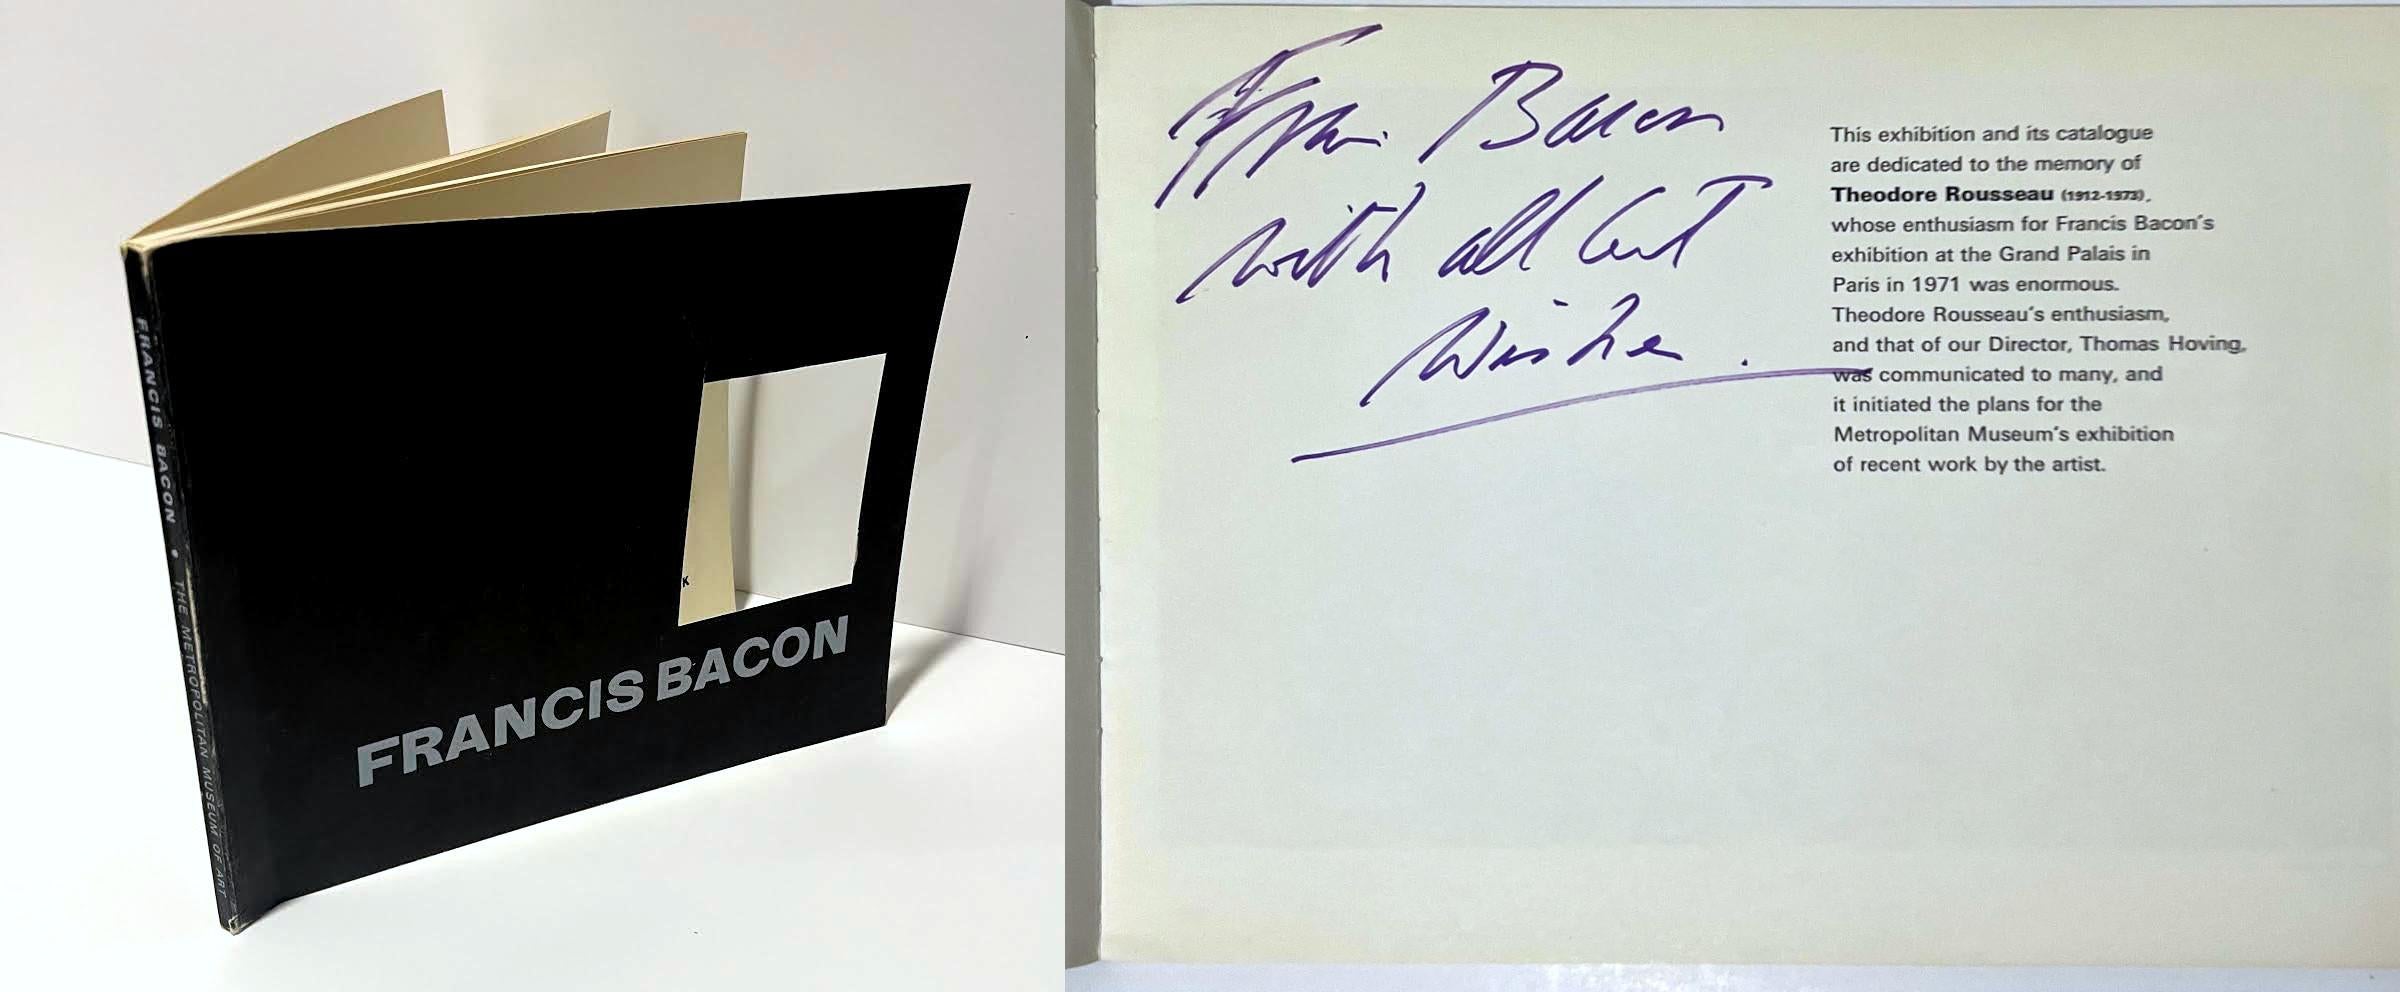 Francis Bacon
Francis Bacon (hand signed and warmly inscribed by Francis Bacon), 1975
Softcover catalogue with stiff wraps (hand signed and warmly inscribed by Francis Bacon)
hand signed and warmly inscribed by Francis Bacon
8 1/2 × 10 3/4 × 1/2